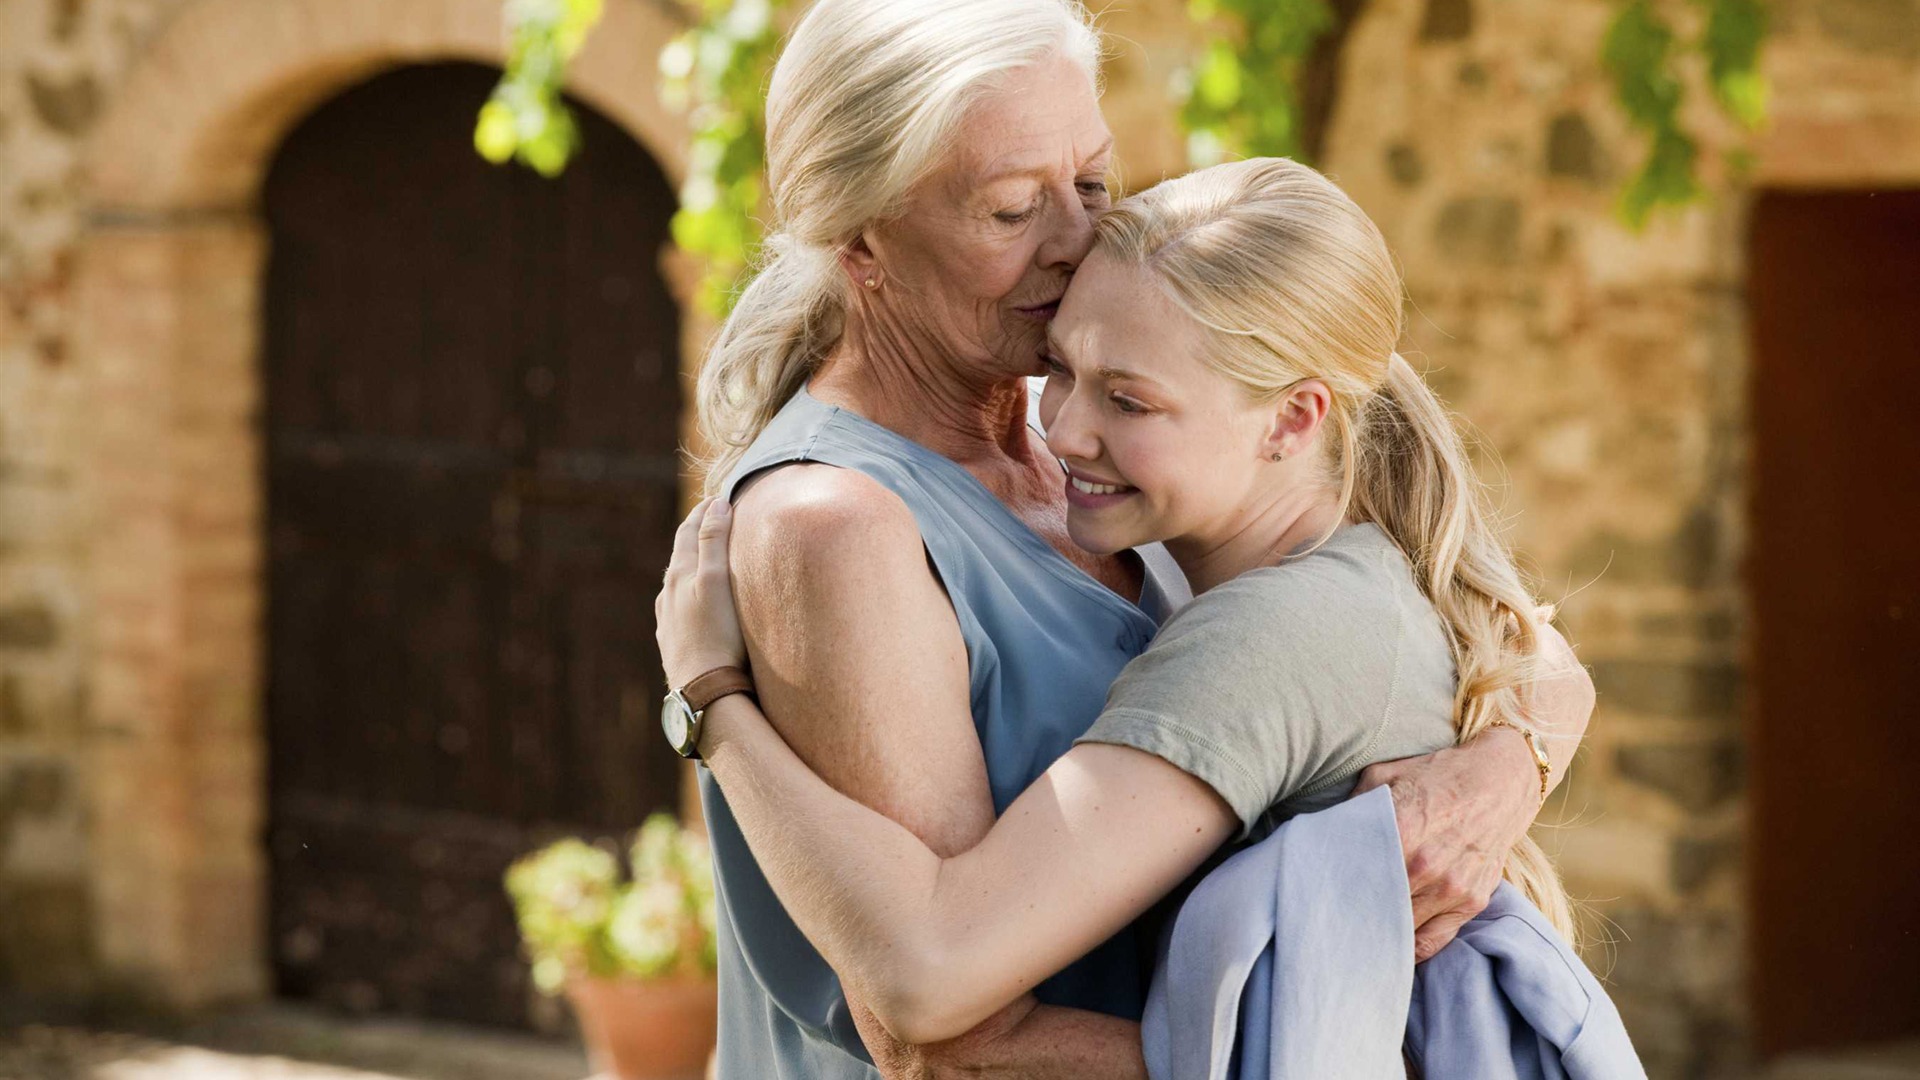 Letters to Juliet 给朱丽叶的信 高清壁纸3 - 1920x1080